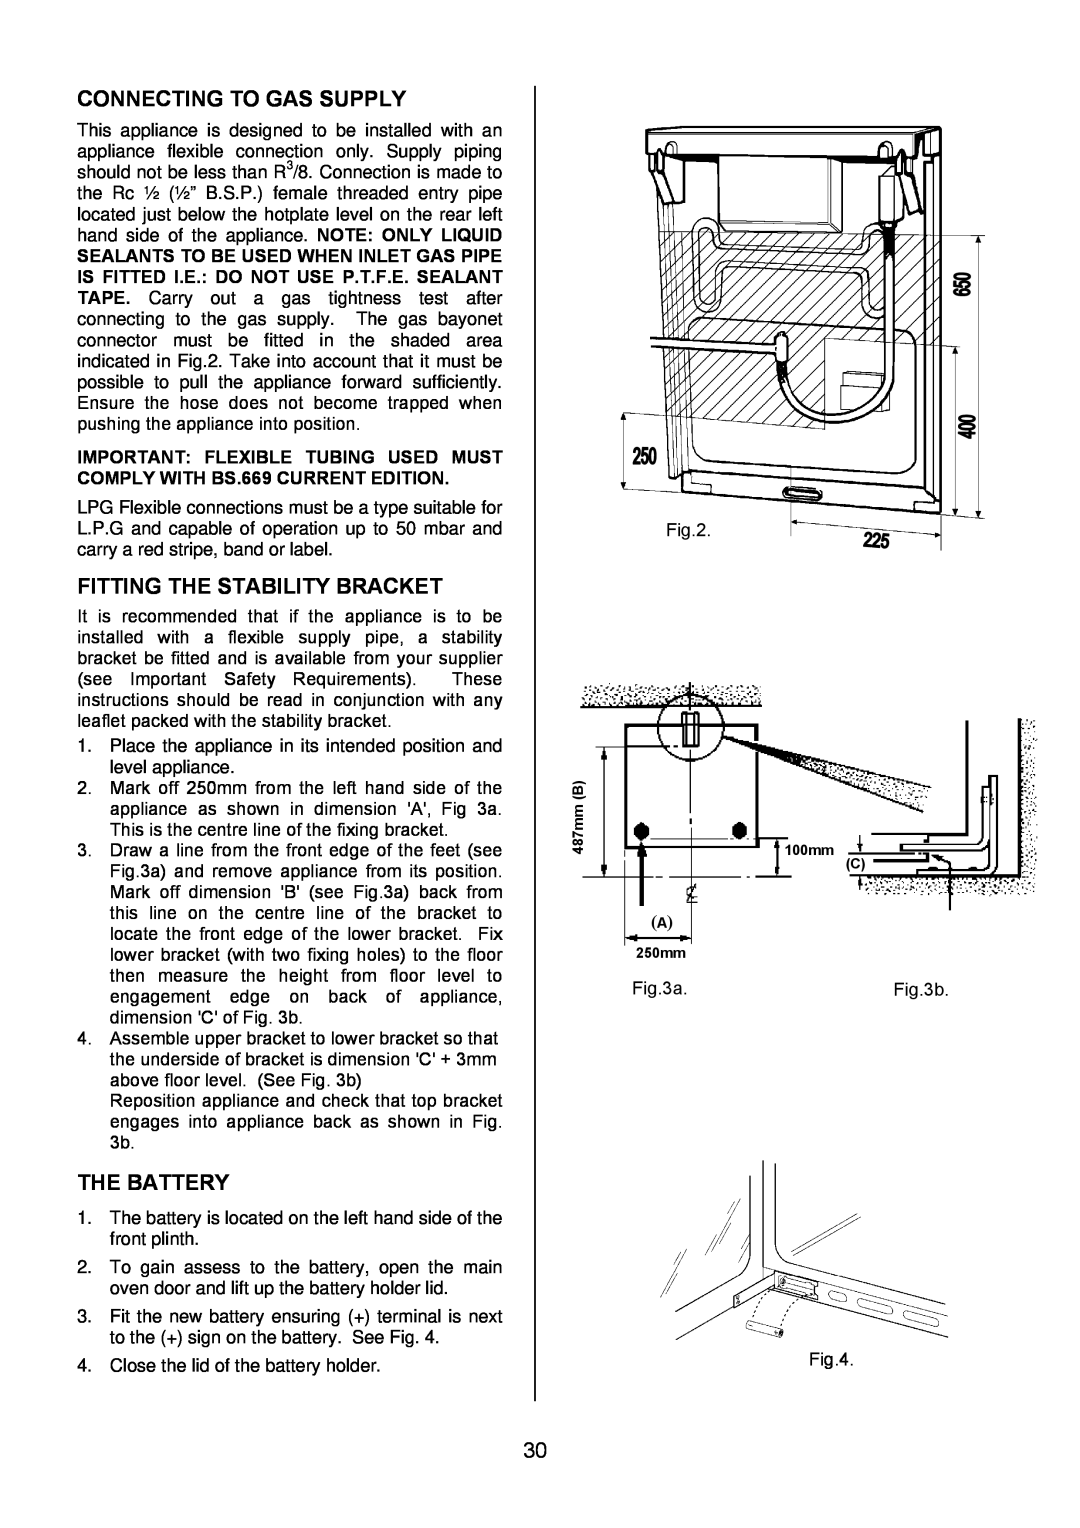 Electrolux EKG5047, EKG5046 manual Connecting To Gas Supply, Fitting The Stability Bracket, The Battery 